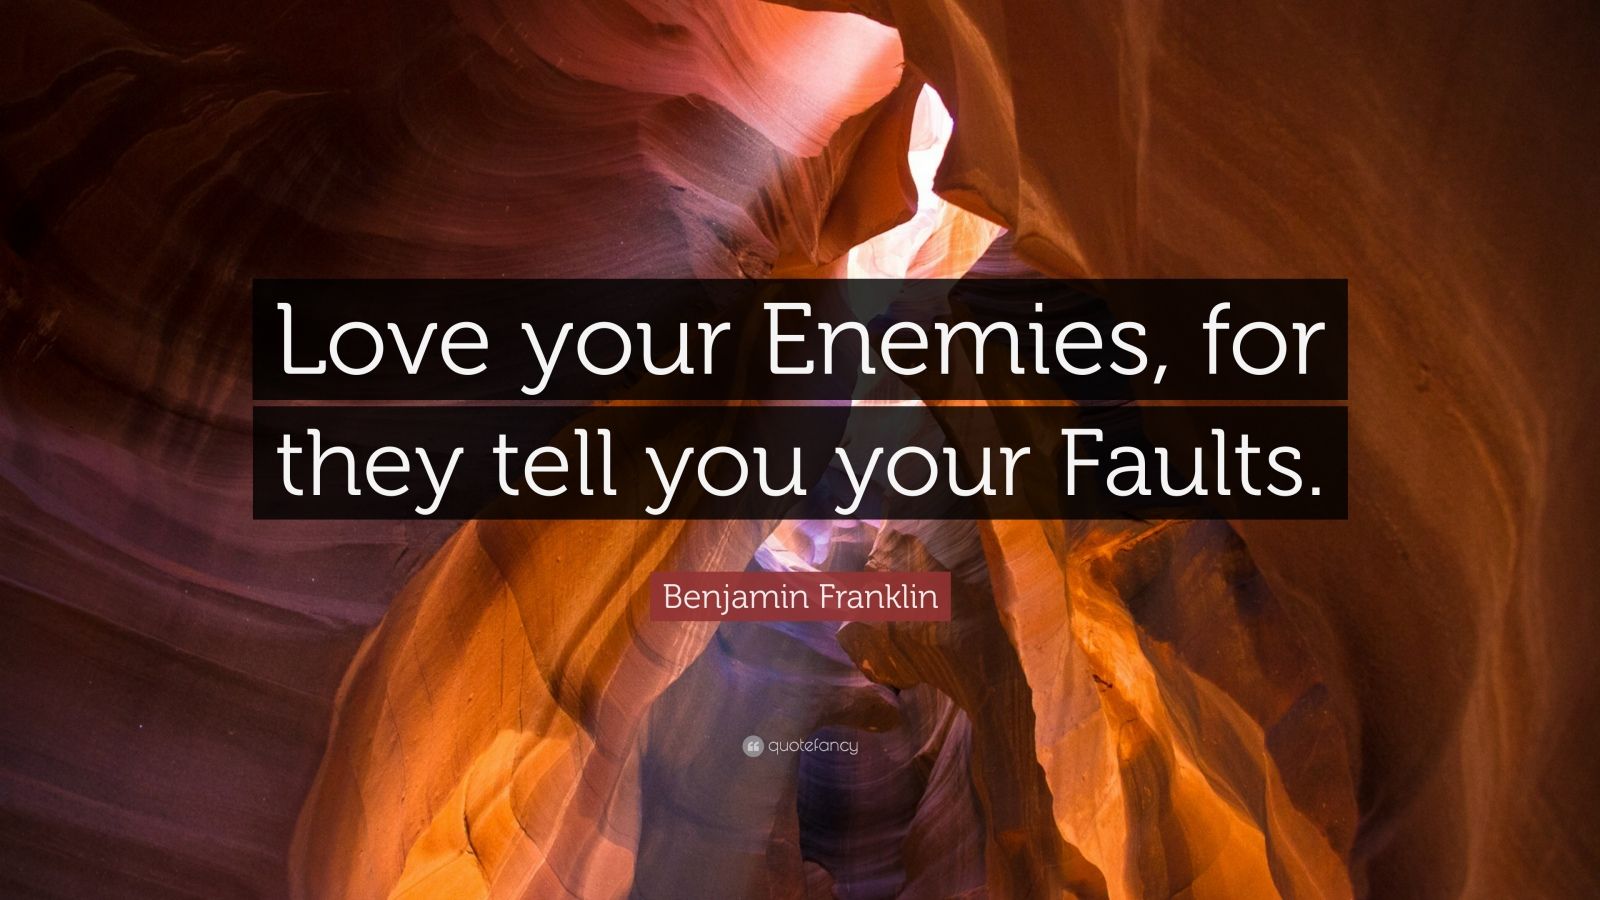 Benjamin Franklin Quote: “Love your Enemies, for they tell you your